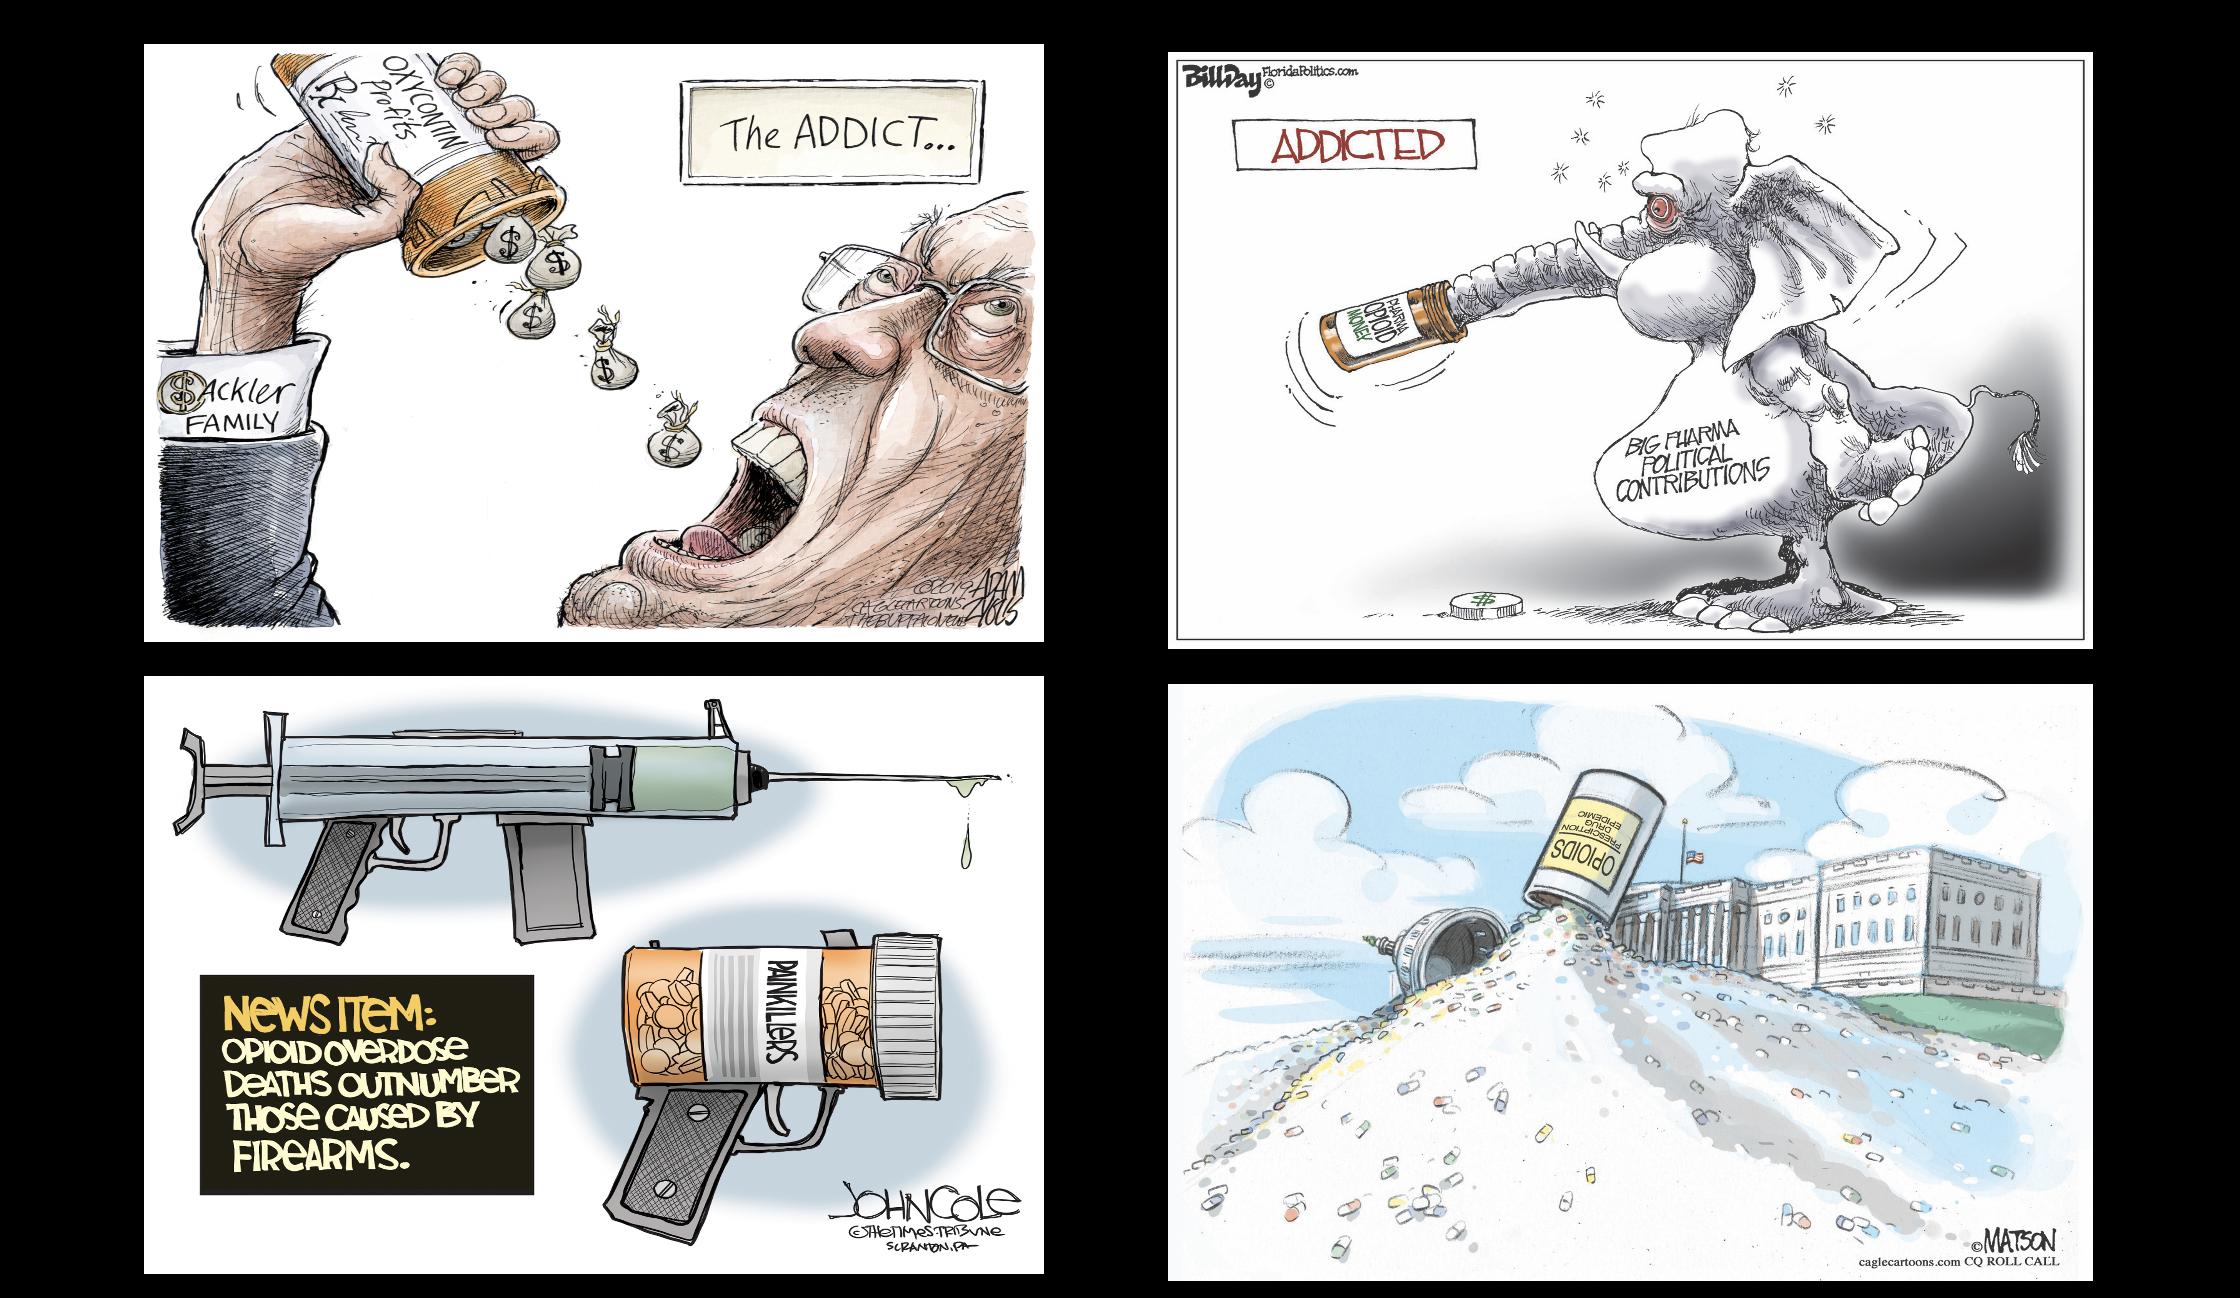 Political cartoons about the opioid crisis, Purdue Pharma and the Sakcler family.